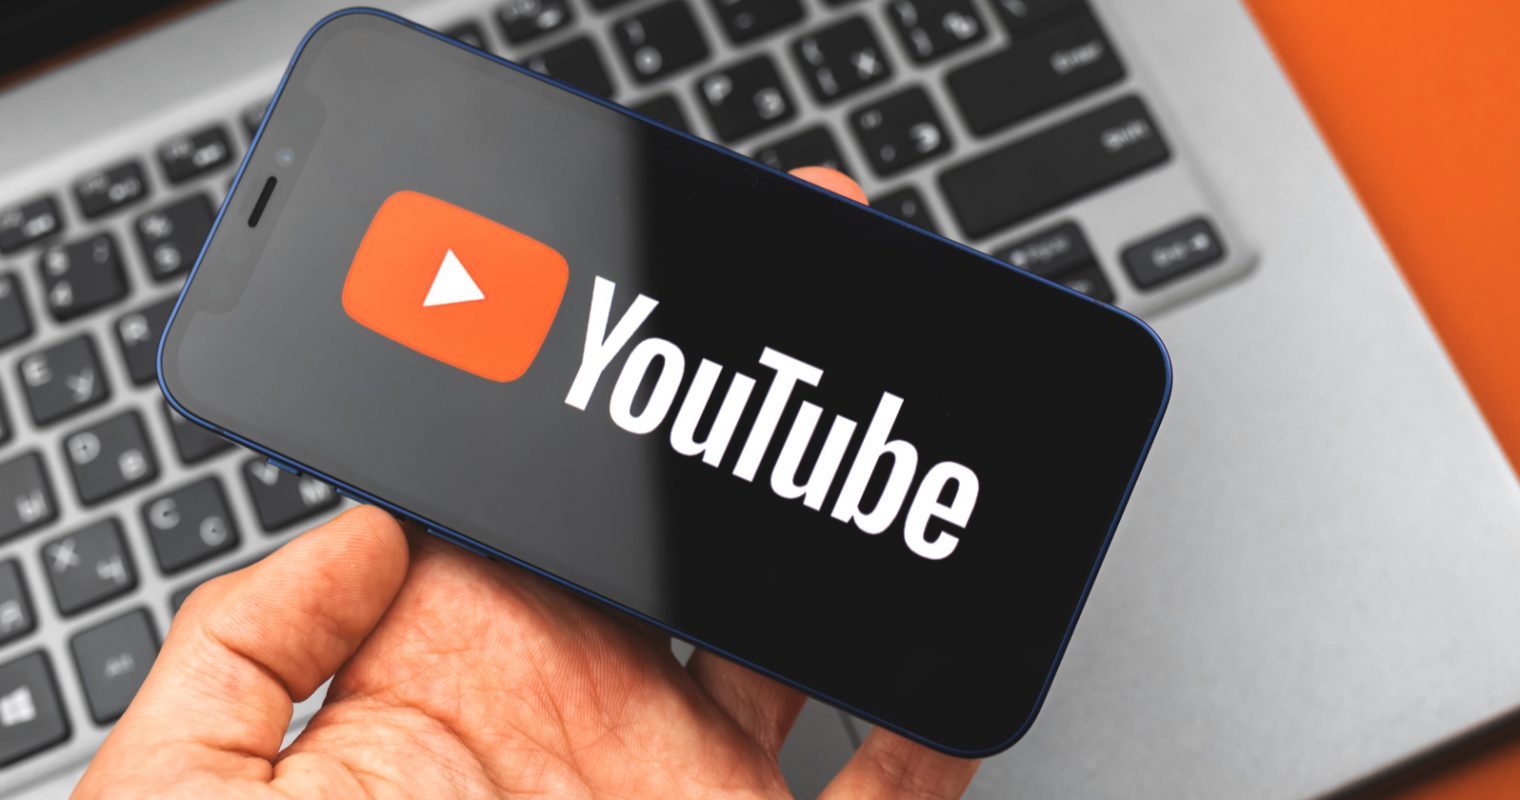 Get ready to click that bell as we take a look at these great channels to help you revamp your YouTube subscriptions.